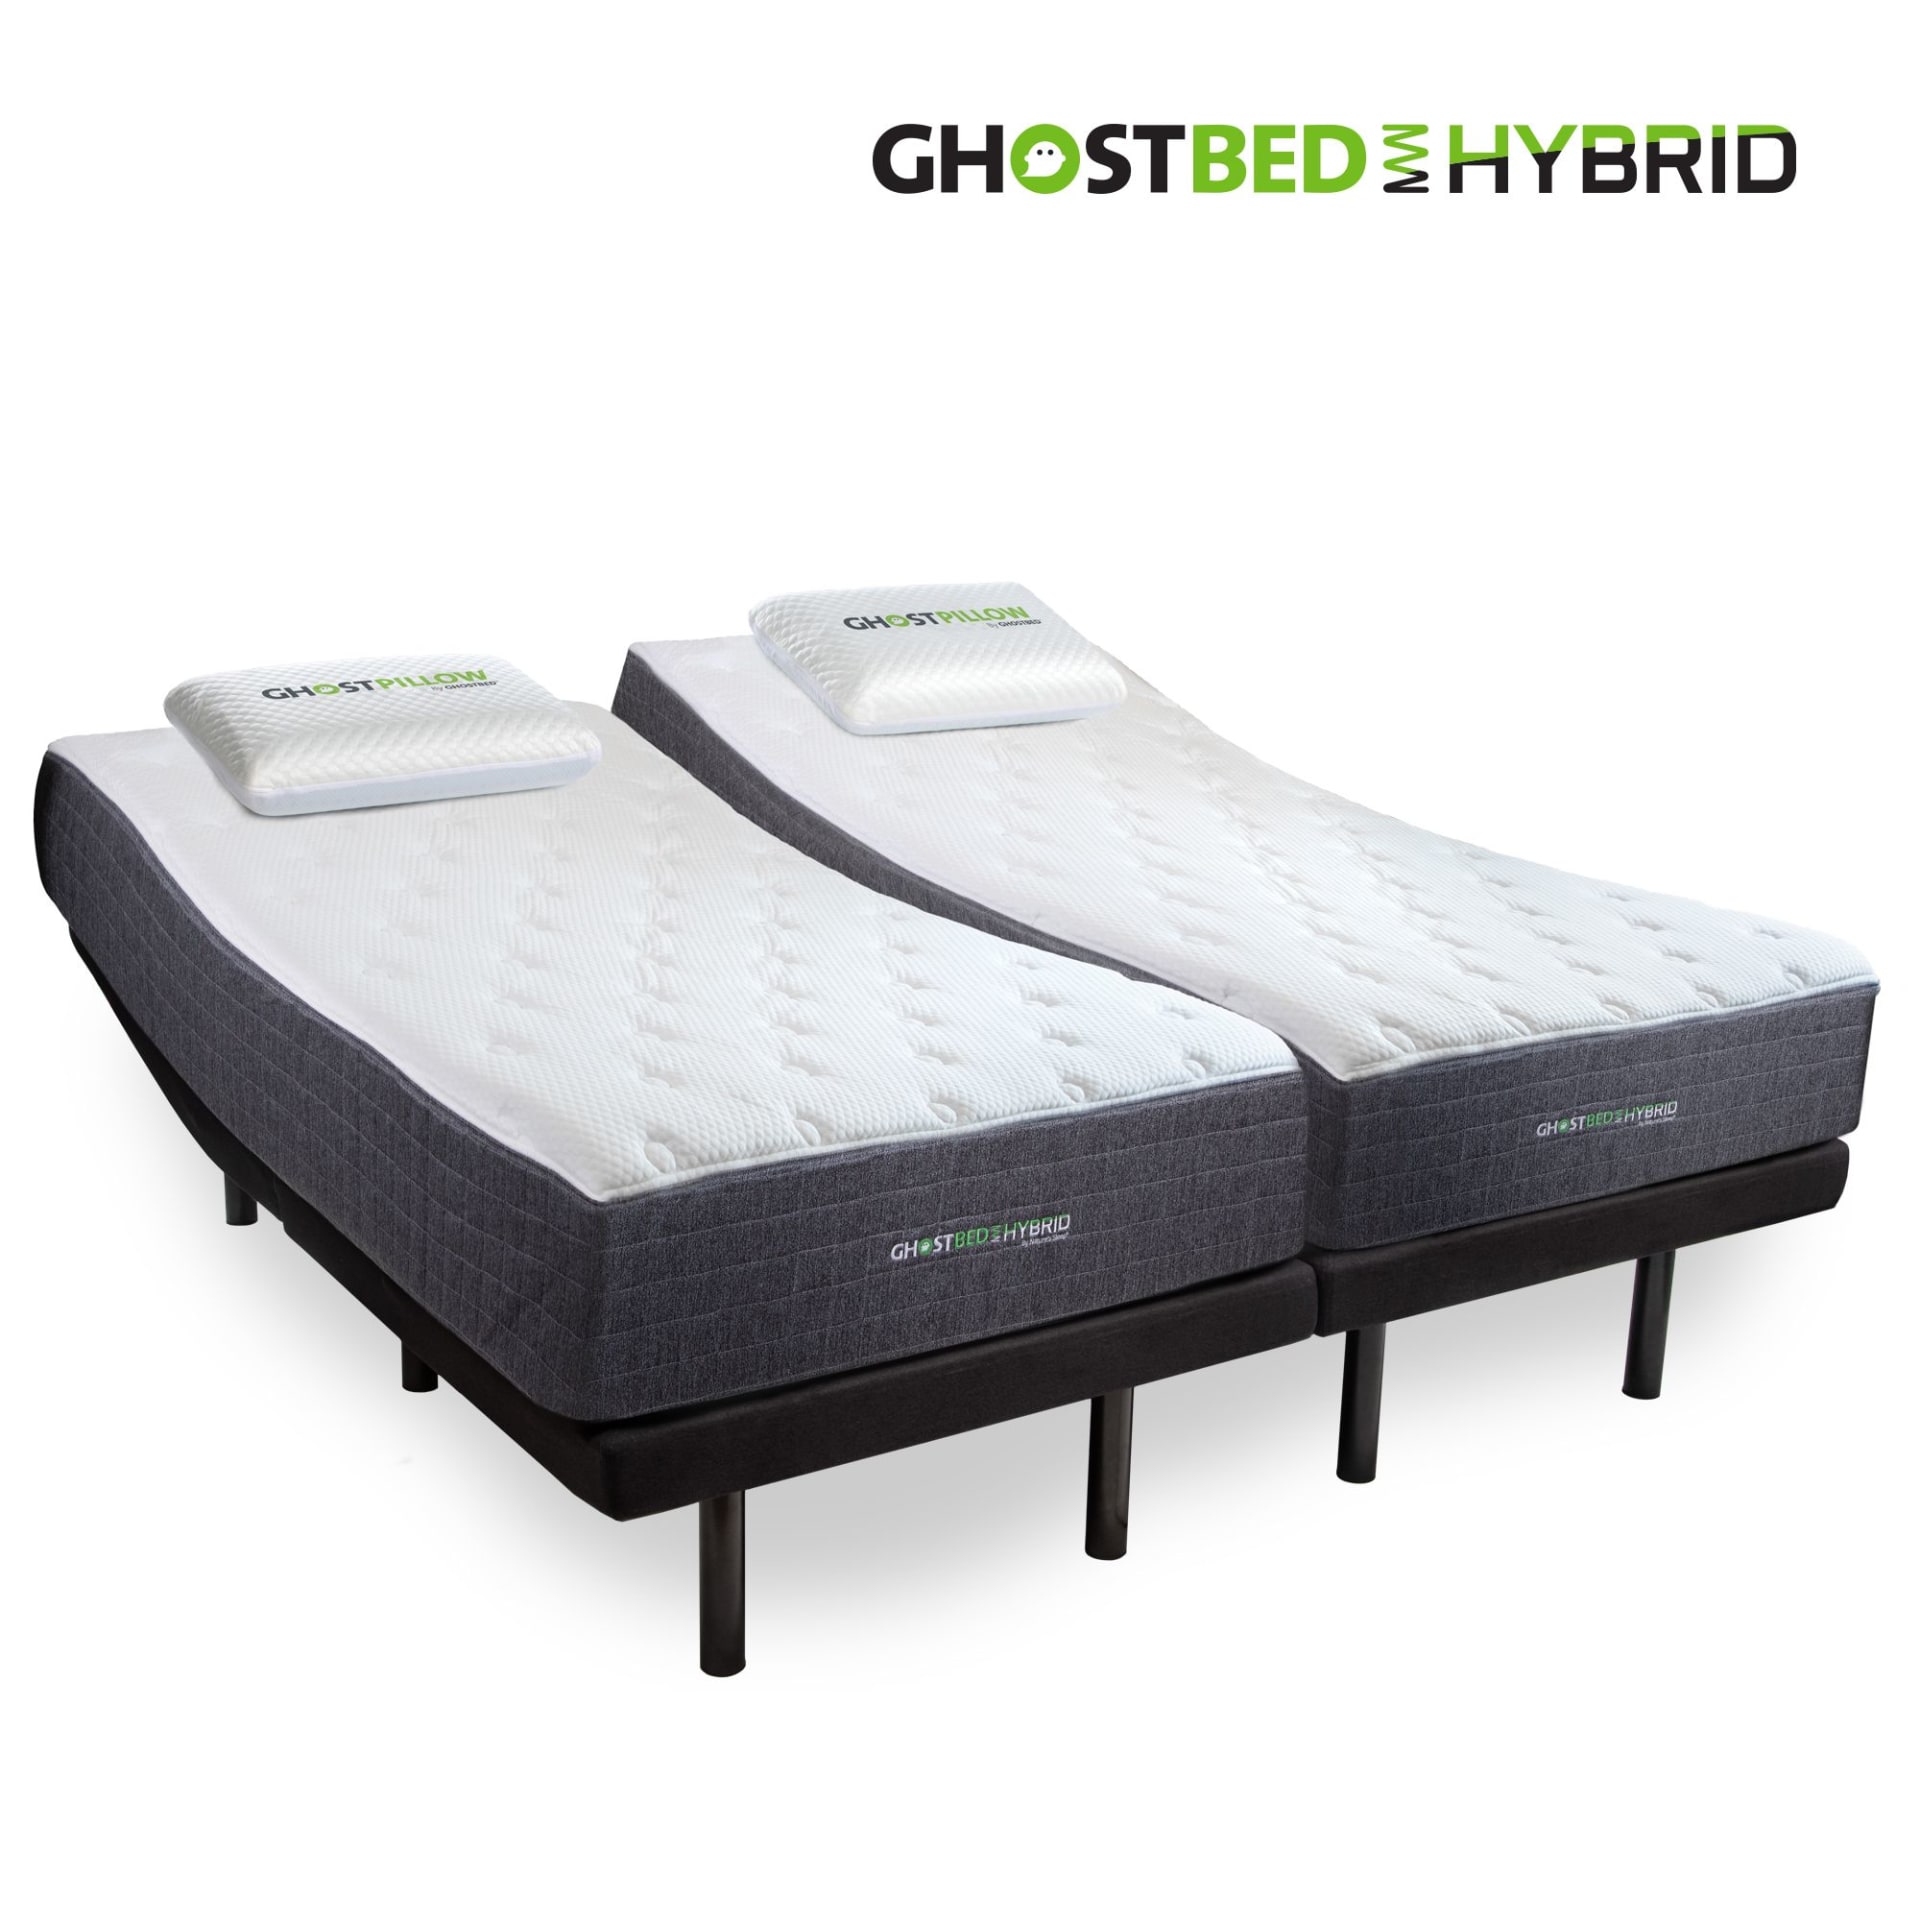 Ghostbed Hybrid 12 Mattress With, Can You Put A Hybrid Mattress On An Adjustable Bed